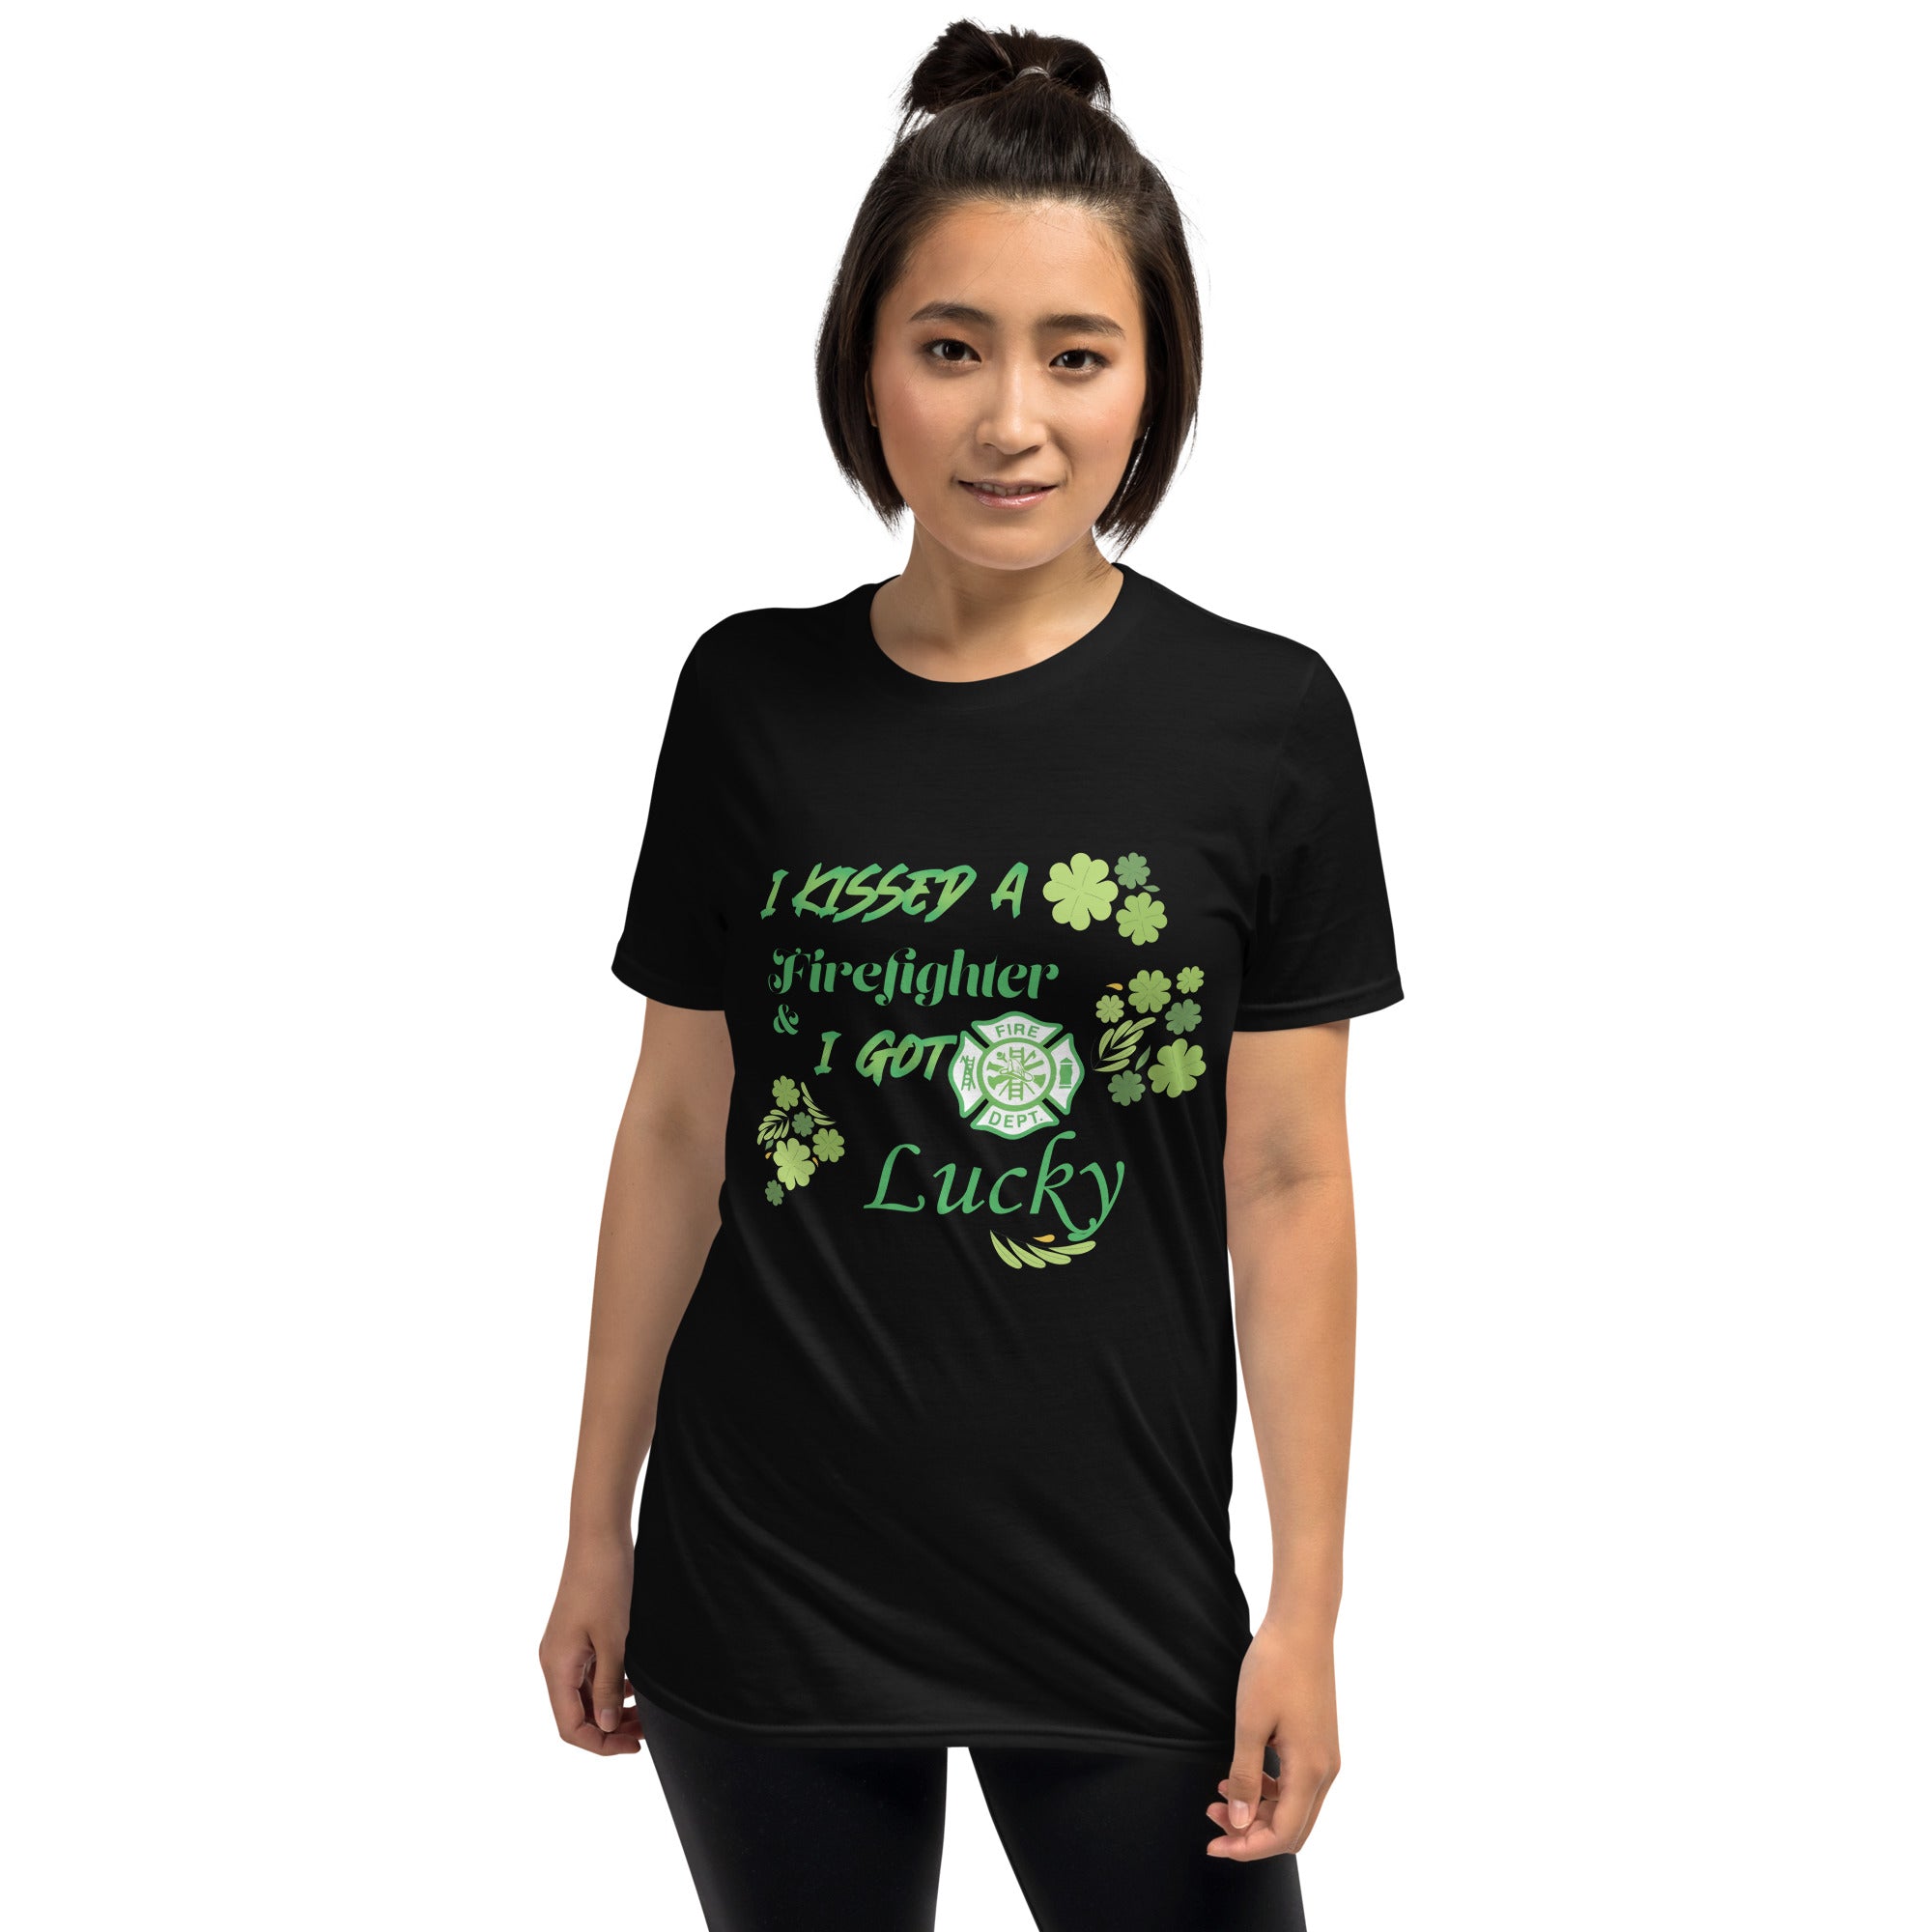 I kissed a Firefighter and Got Lucky Short-Sleeve Unisex T-Shirt